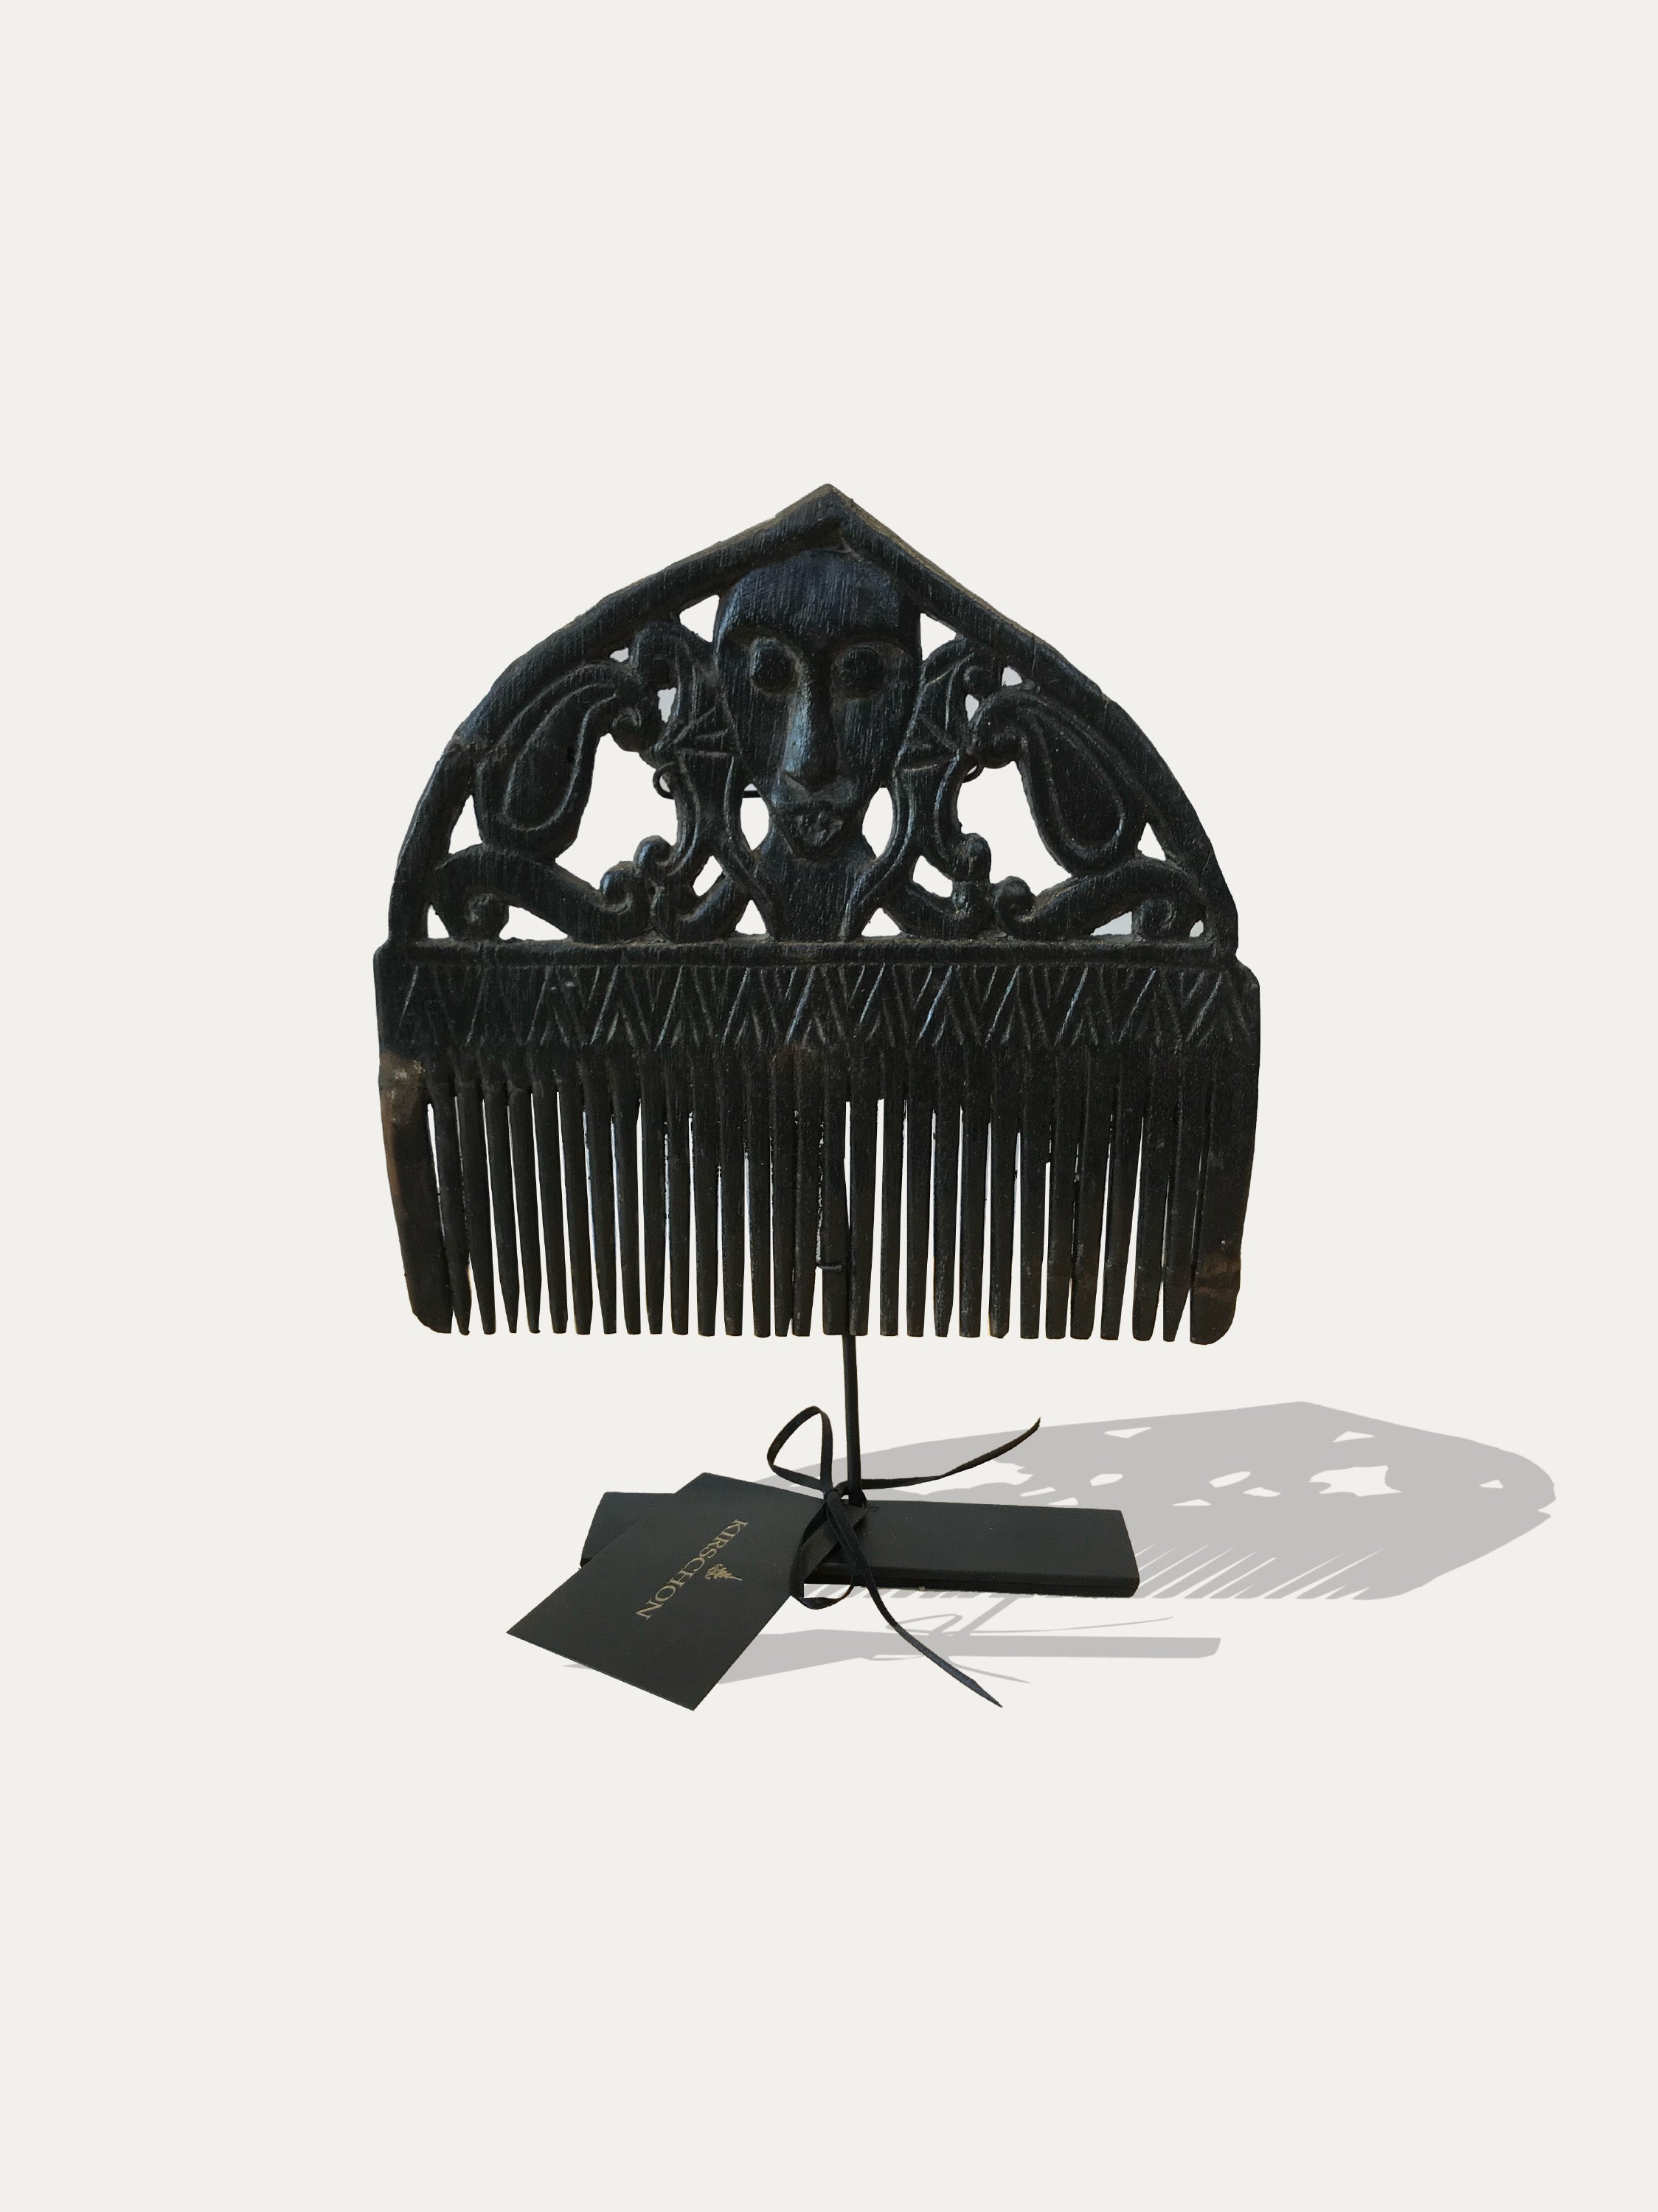 Dayak comb from Borneo - Asian Art from Kirschon